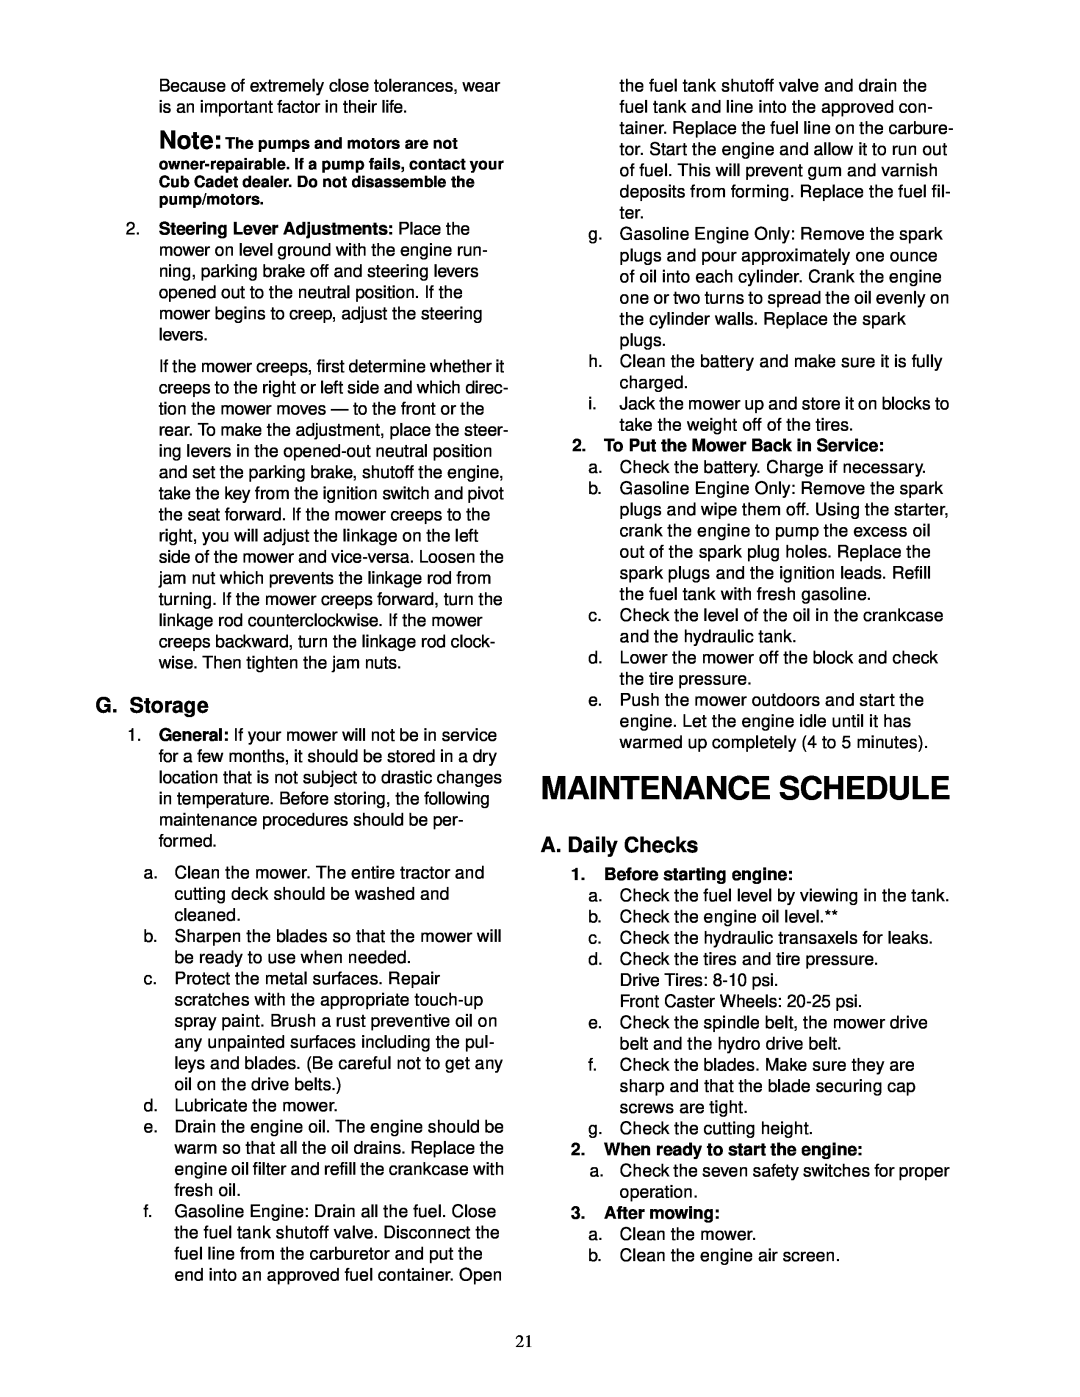 Cub Cadet 18.5HP Z-Force 42, 22HP Z-Force 48 service manual Maintenance Schedule, G. Storage, A. Daily Checks 